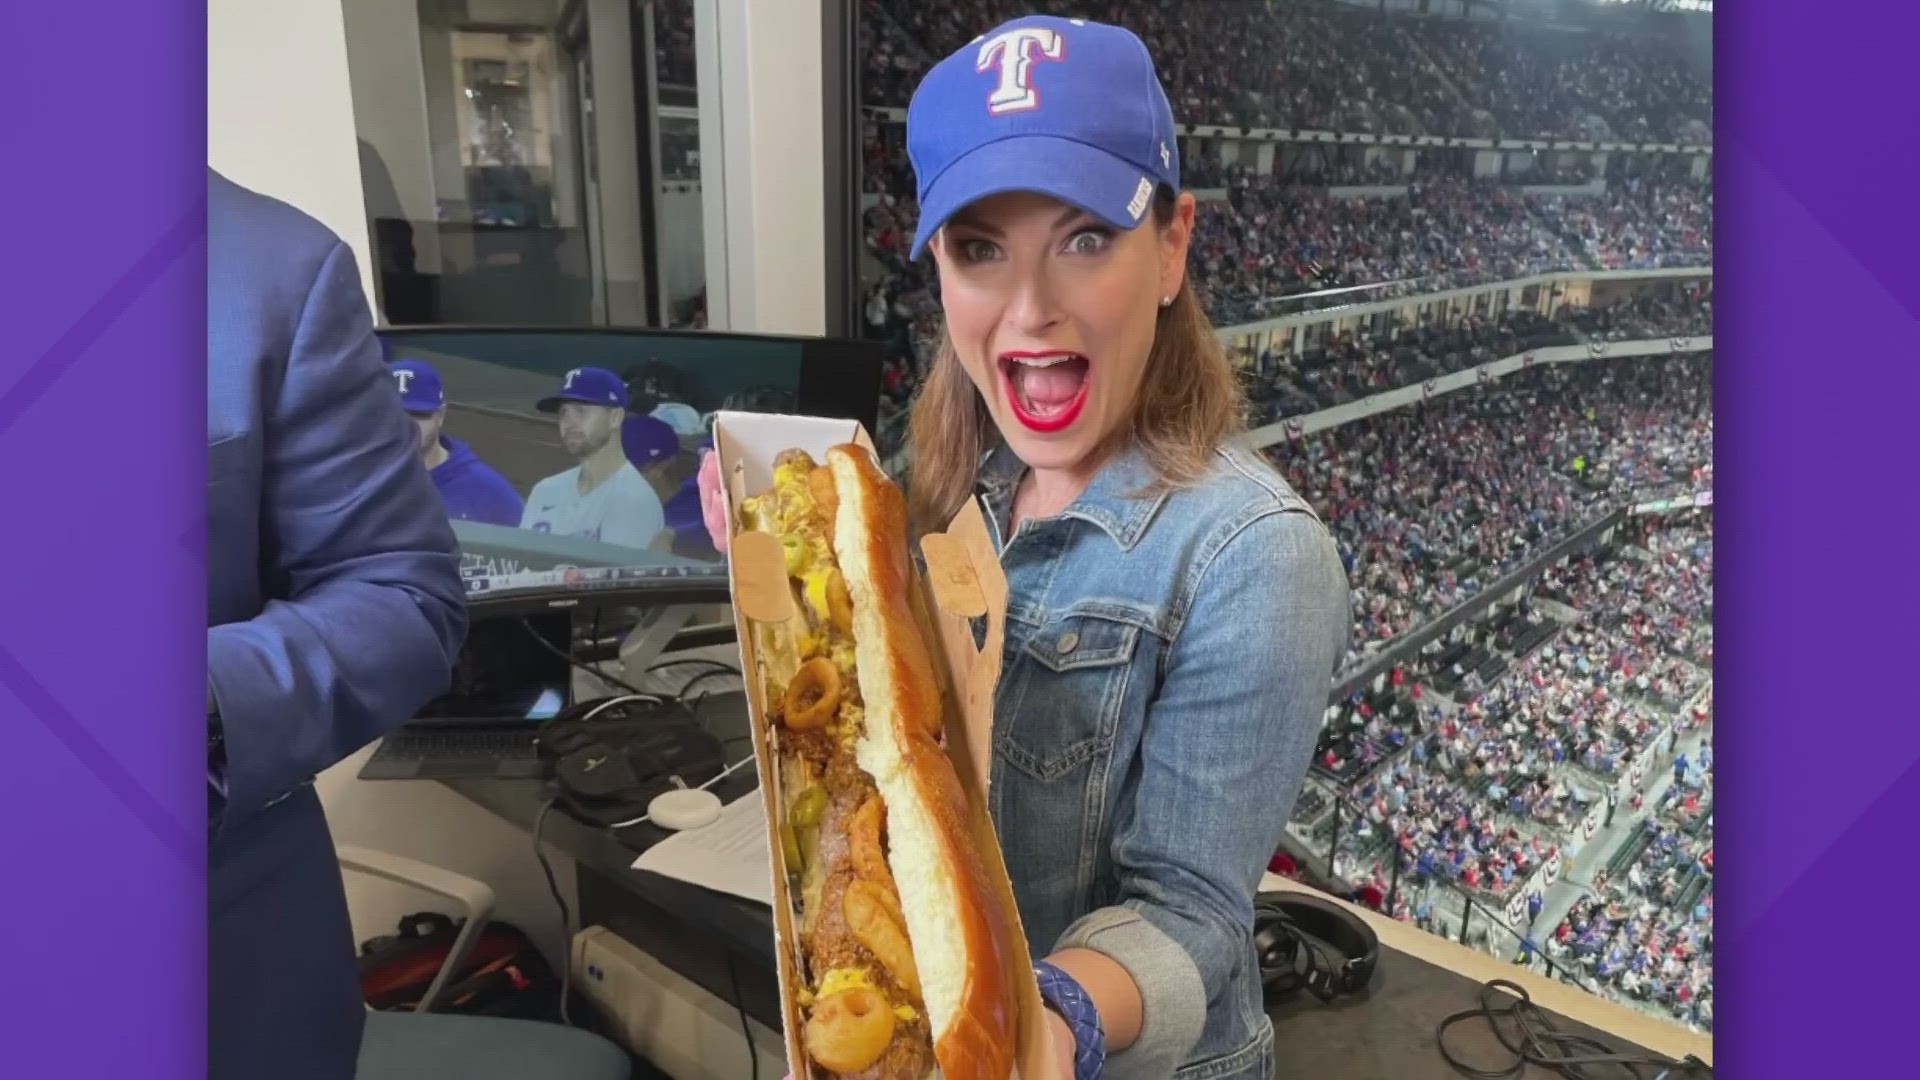 New field, new food: 6 concessions for baseball fans at Texas Rangers'  Globe Life Field